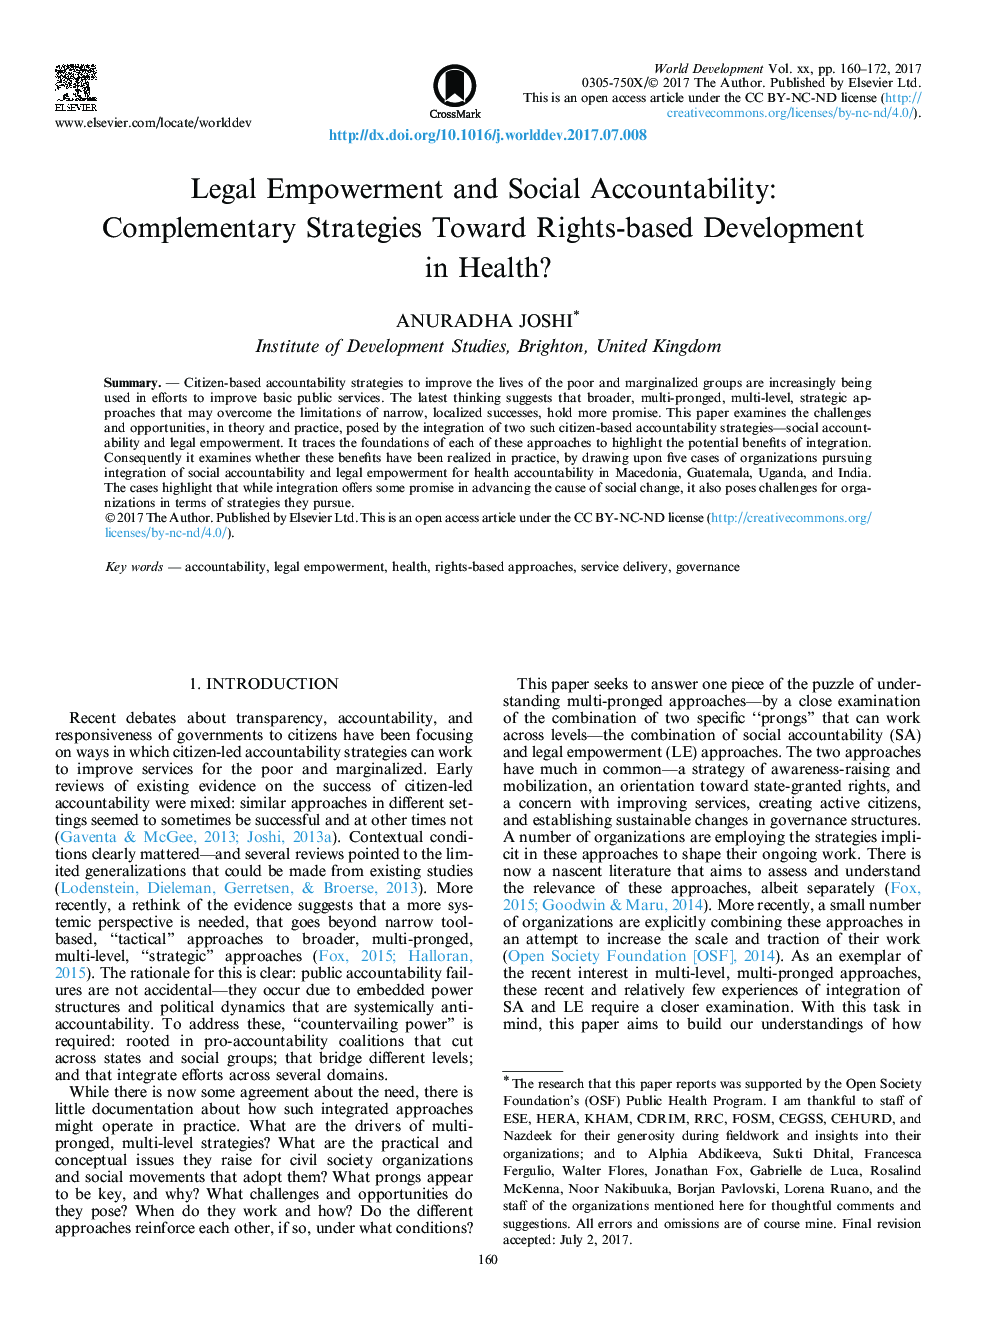 Legal Empowerment and Social Accountability: Complementary Strategies Toward Rights-based Development in Health?